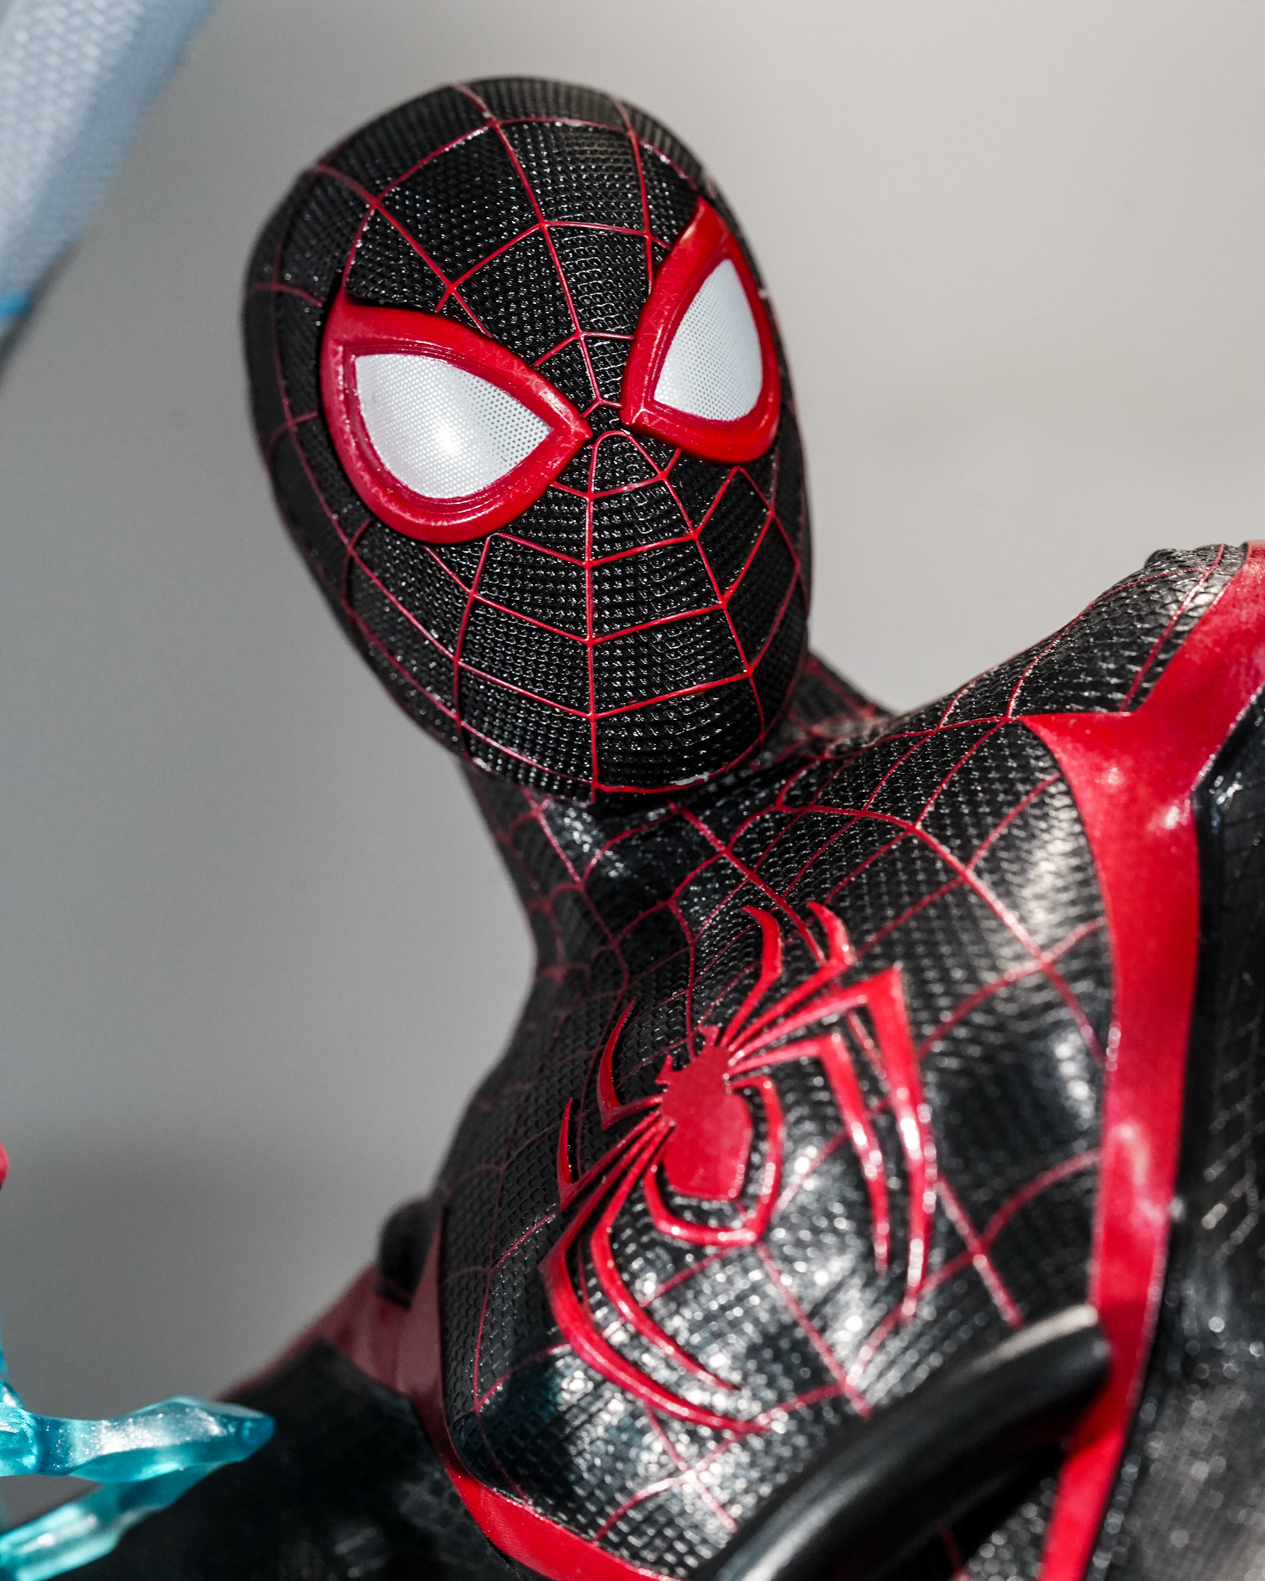 Hot Toys Miles Morales 'Spider-Man' Figure Release Info